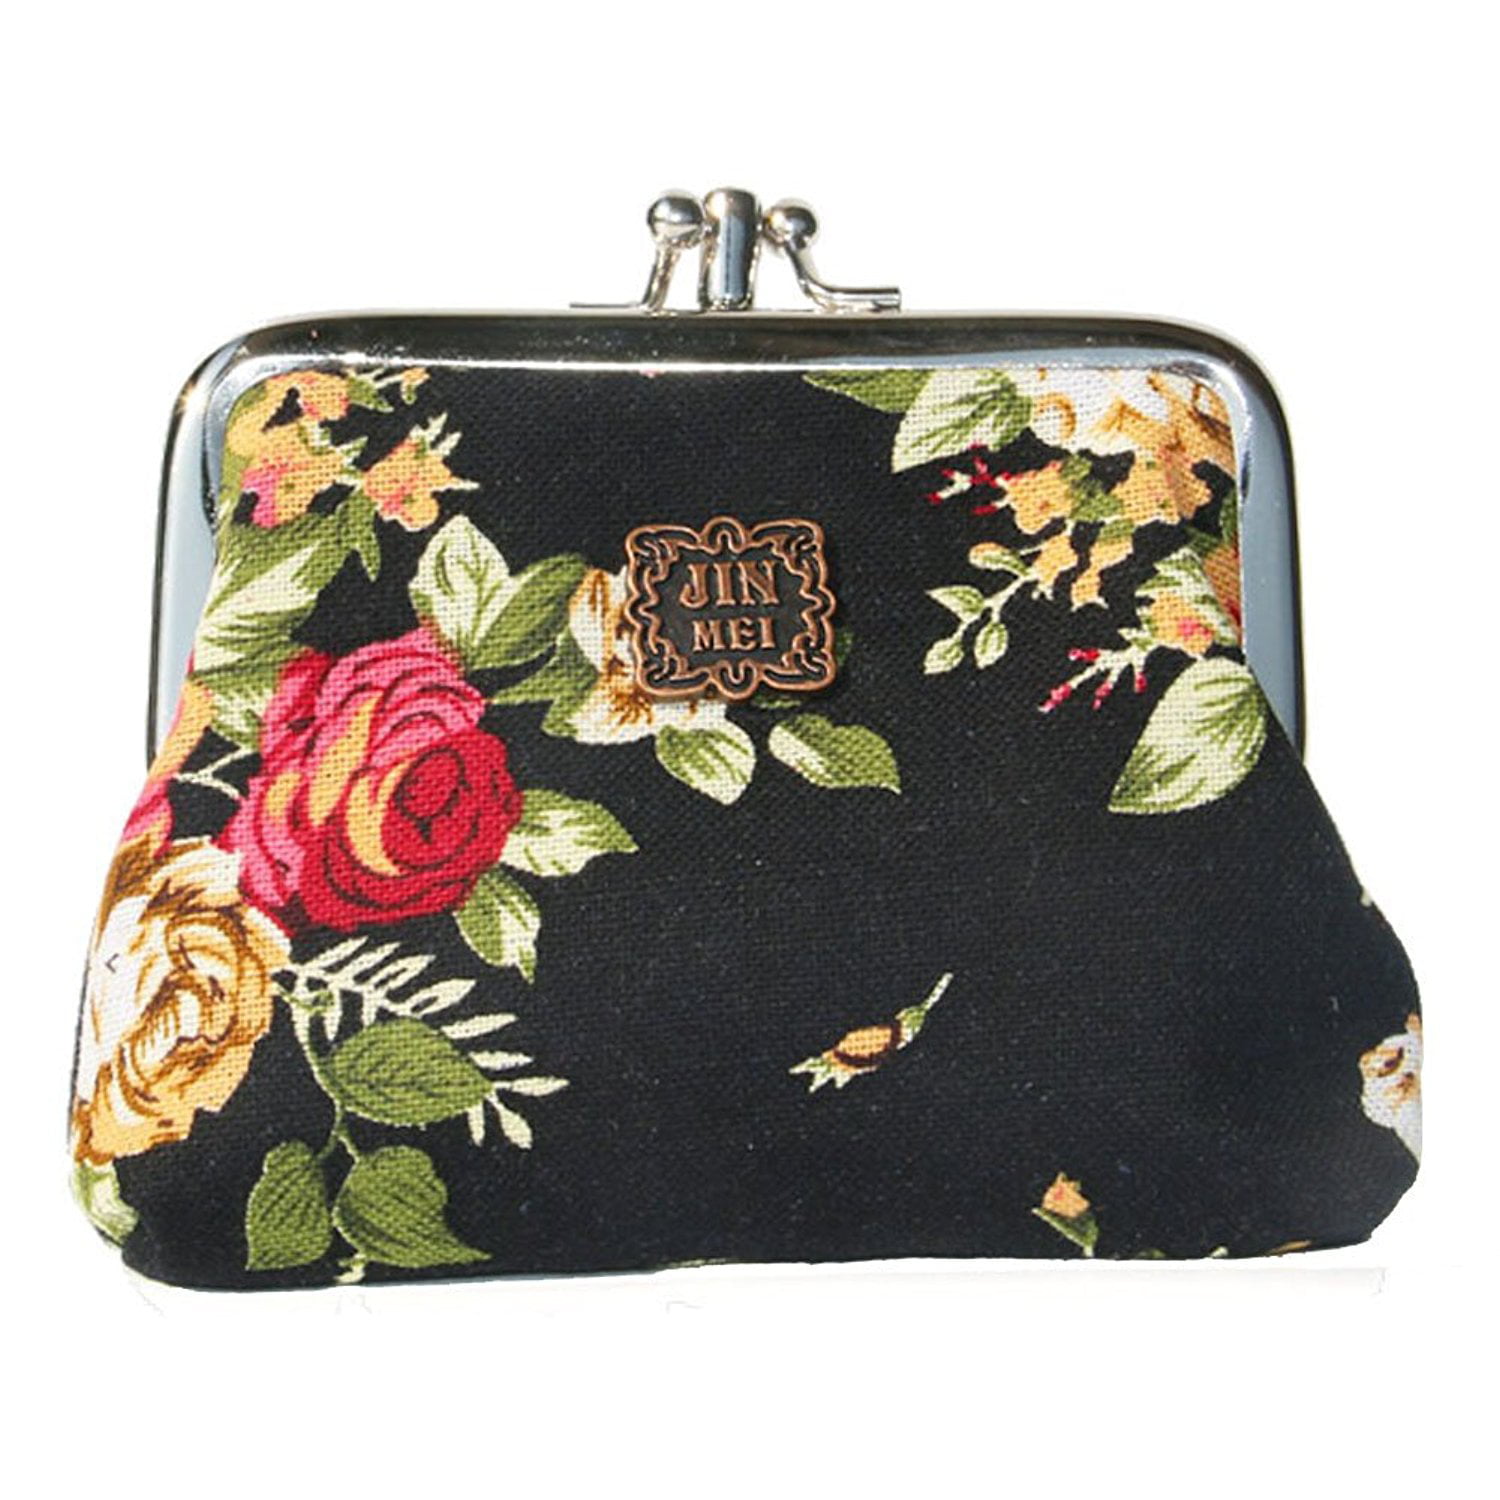 Blooming Pink Flower Print Leather Coin Purse Mini Pouch Exquisite Buckle Change Purse Wallets Clutch Handbag